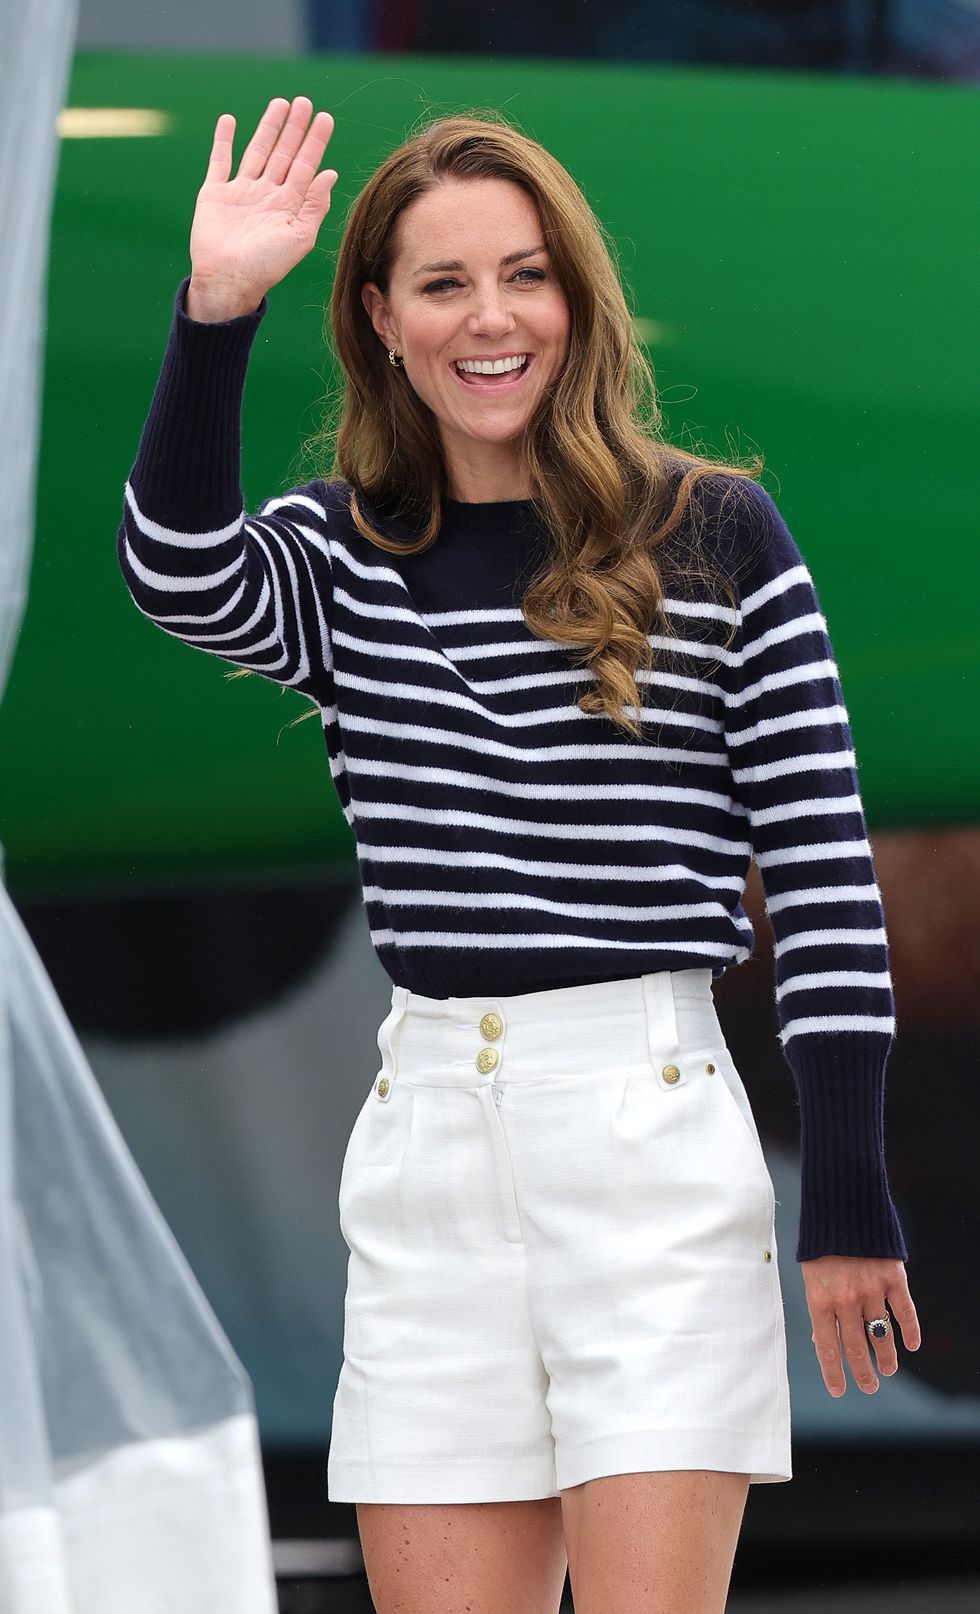 People Got Very Excited to See Kate Middleton Wearing Shorts at